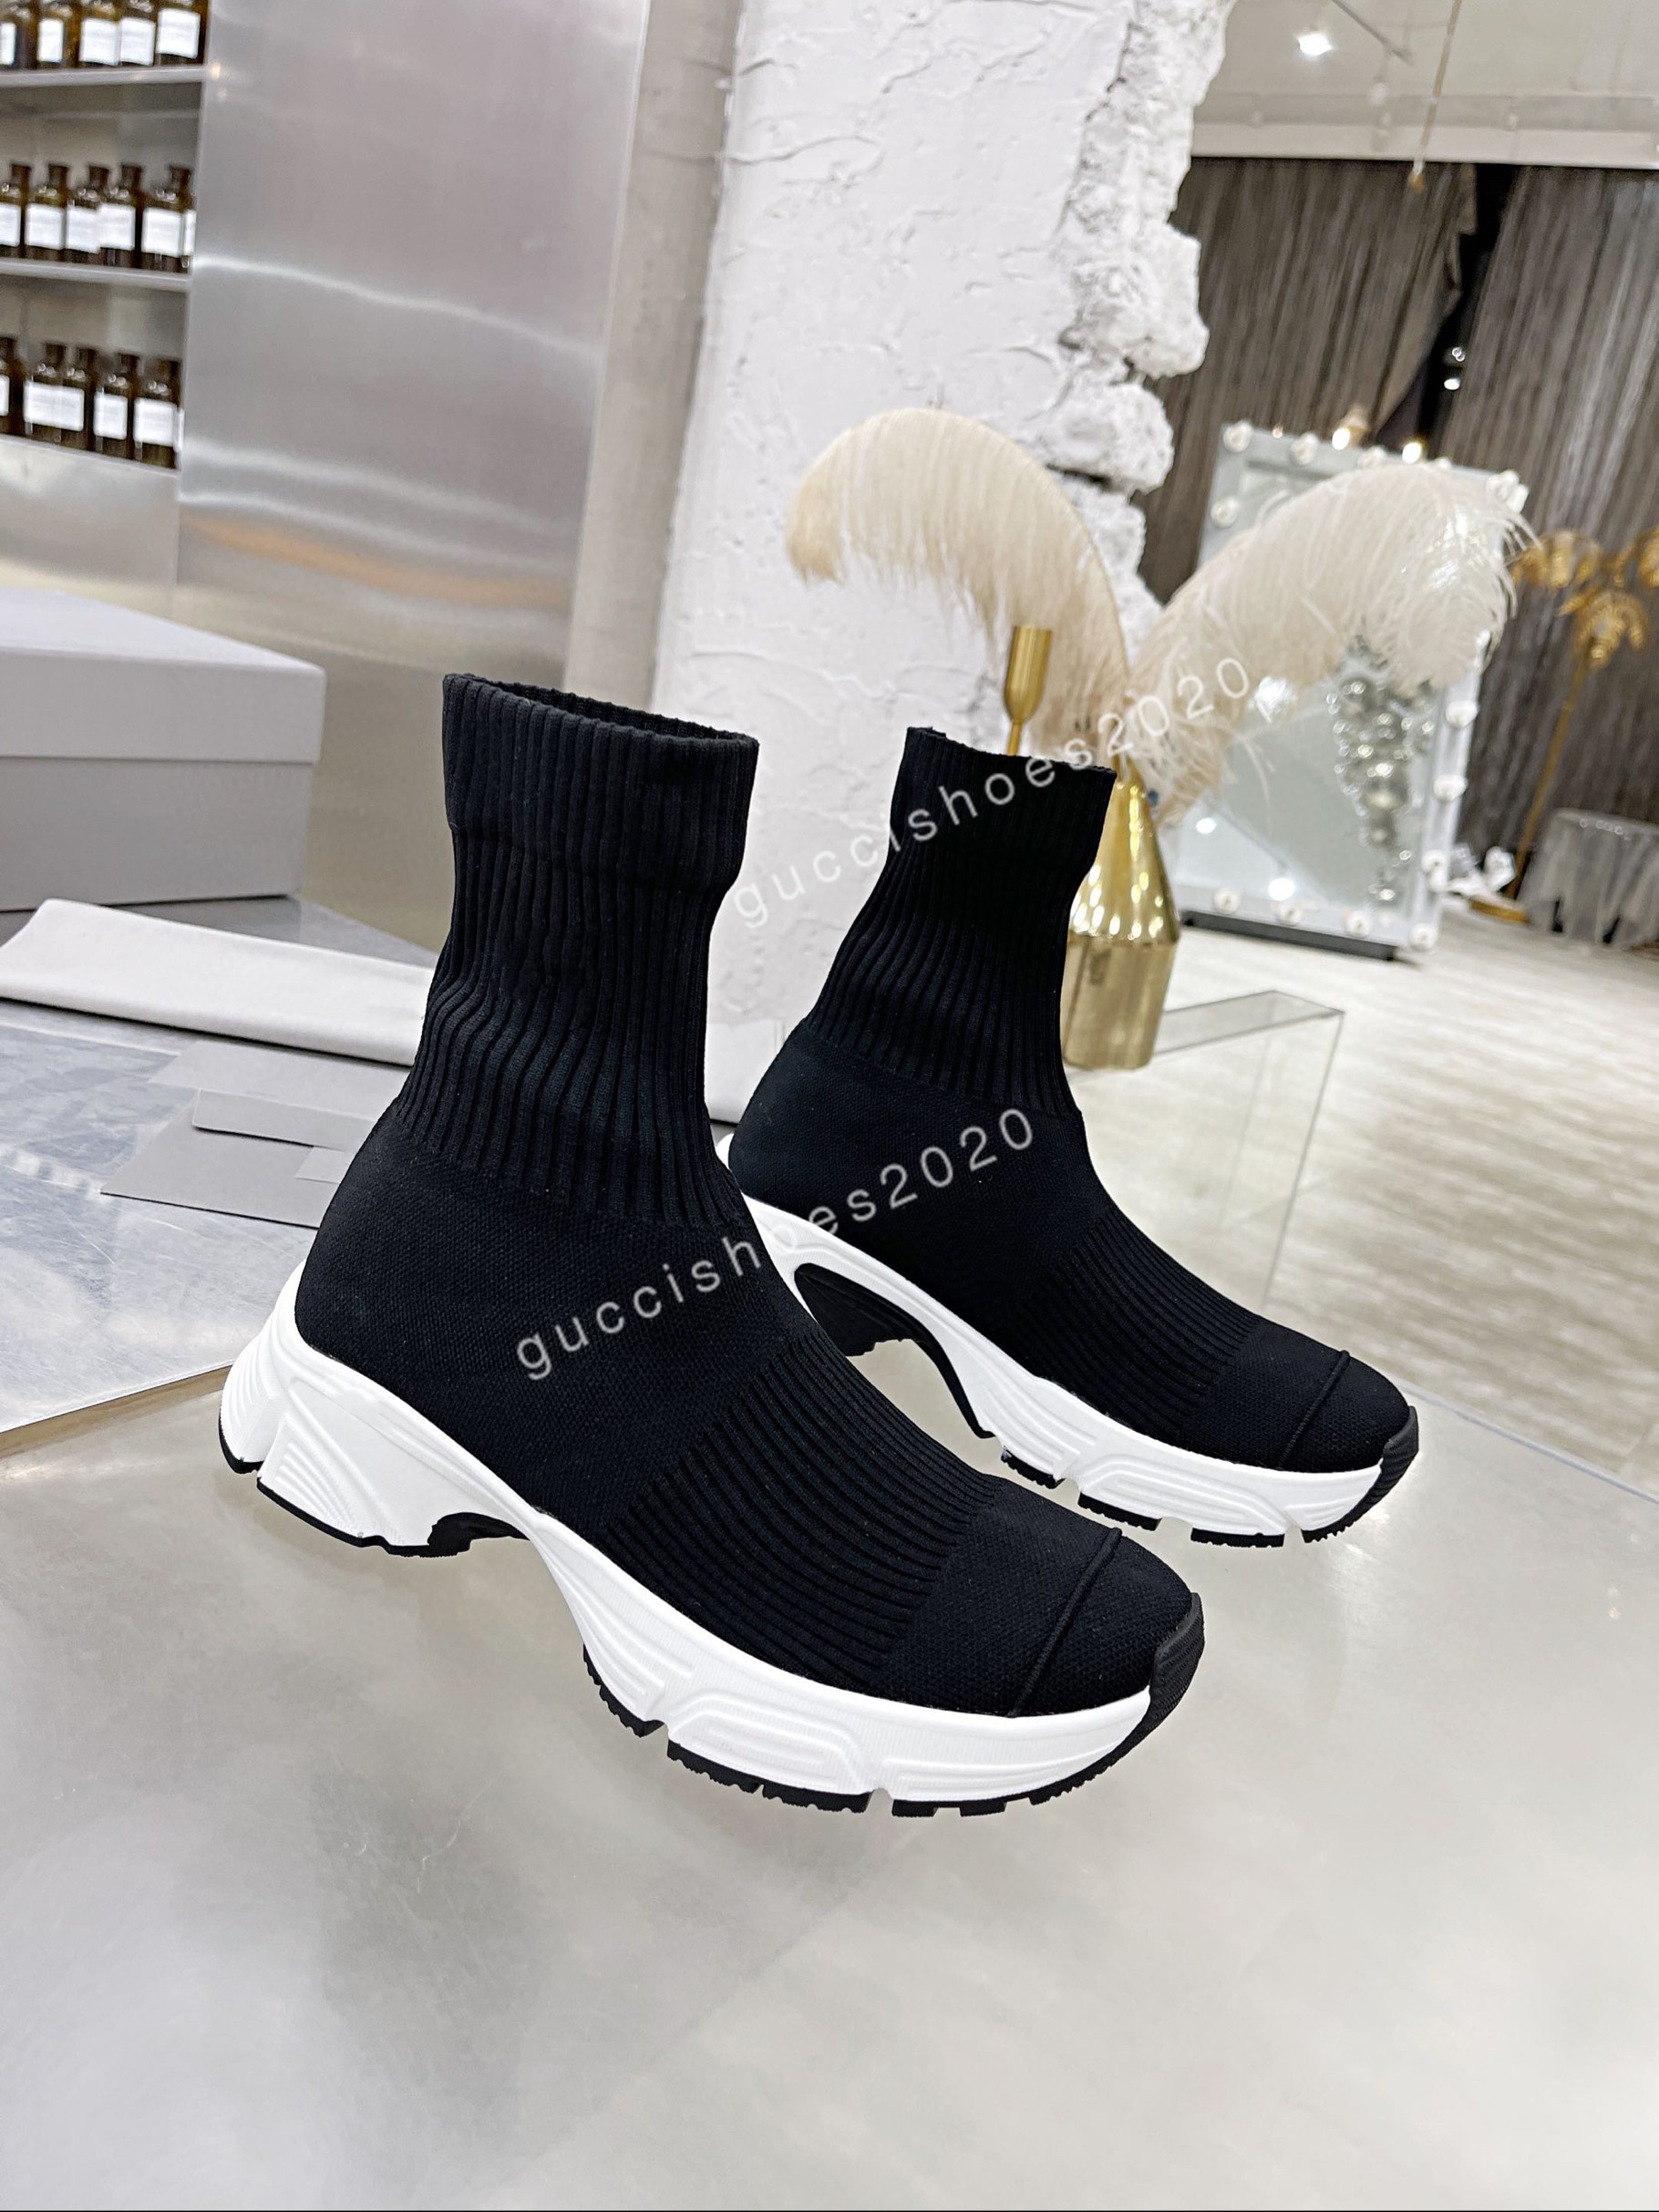 

2022 Top Quality Designer Boots Socks Shoes Casual Paris Rainbow Fashion Sock Women Men The Hacker Project Hight Increasing Old Dad Trainers Sneakers size35-45, 01